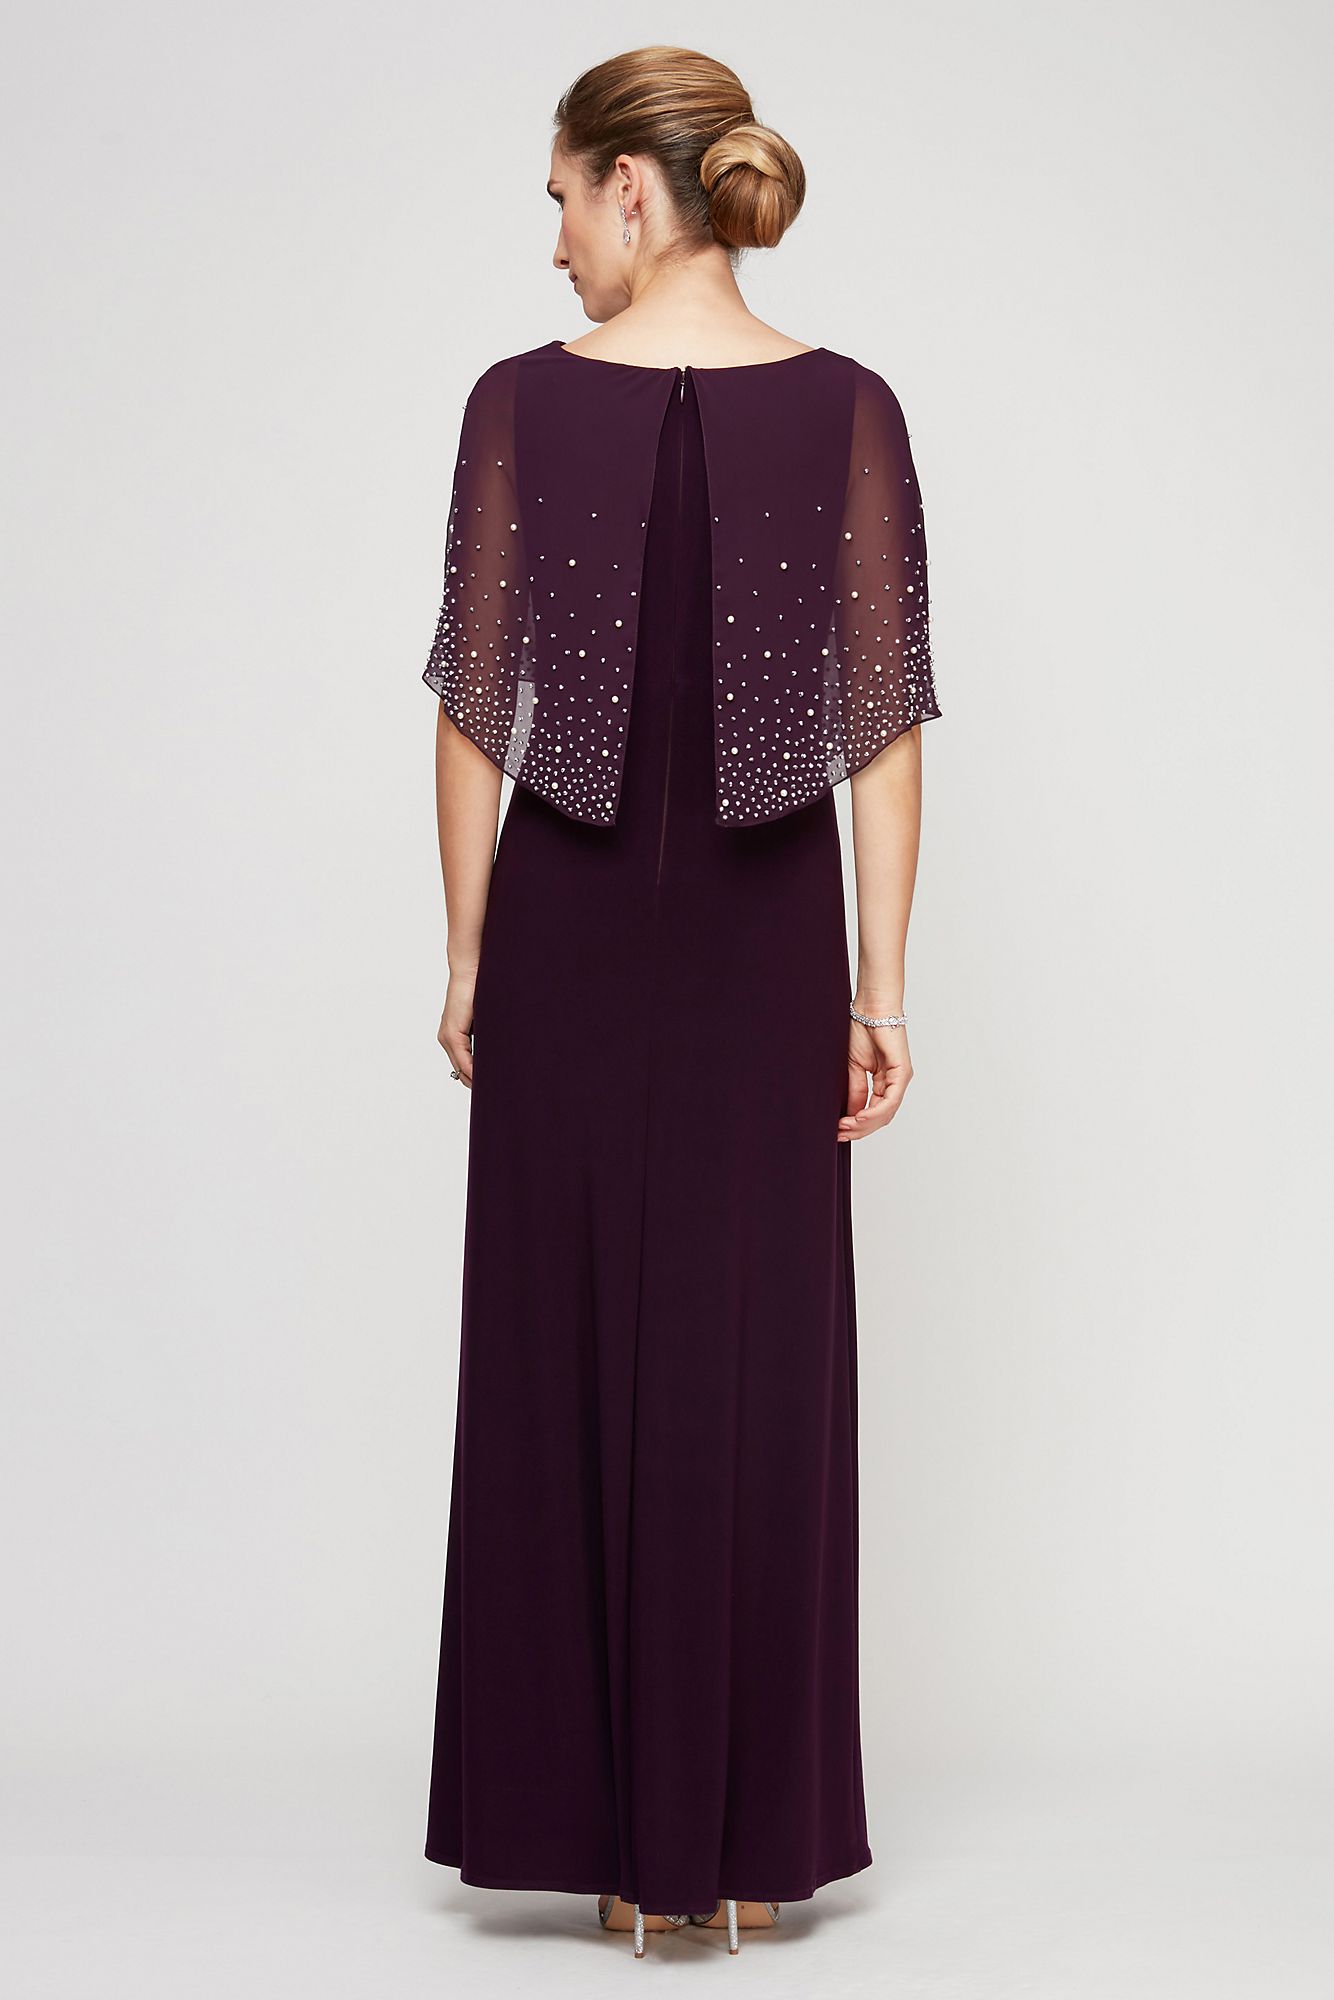 Chiffon Long Dress with Embellished Sheer Popover 81351534